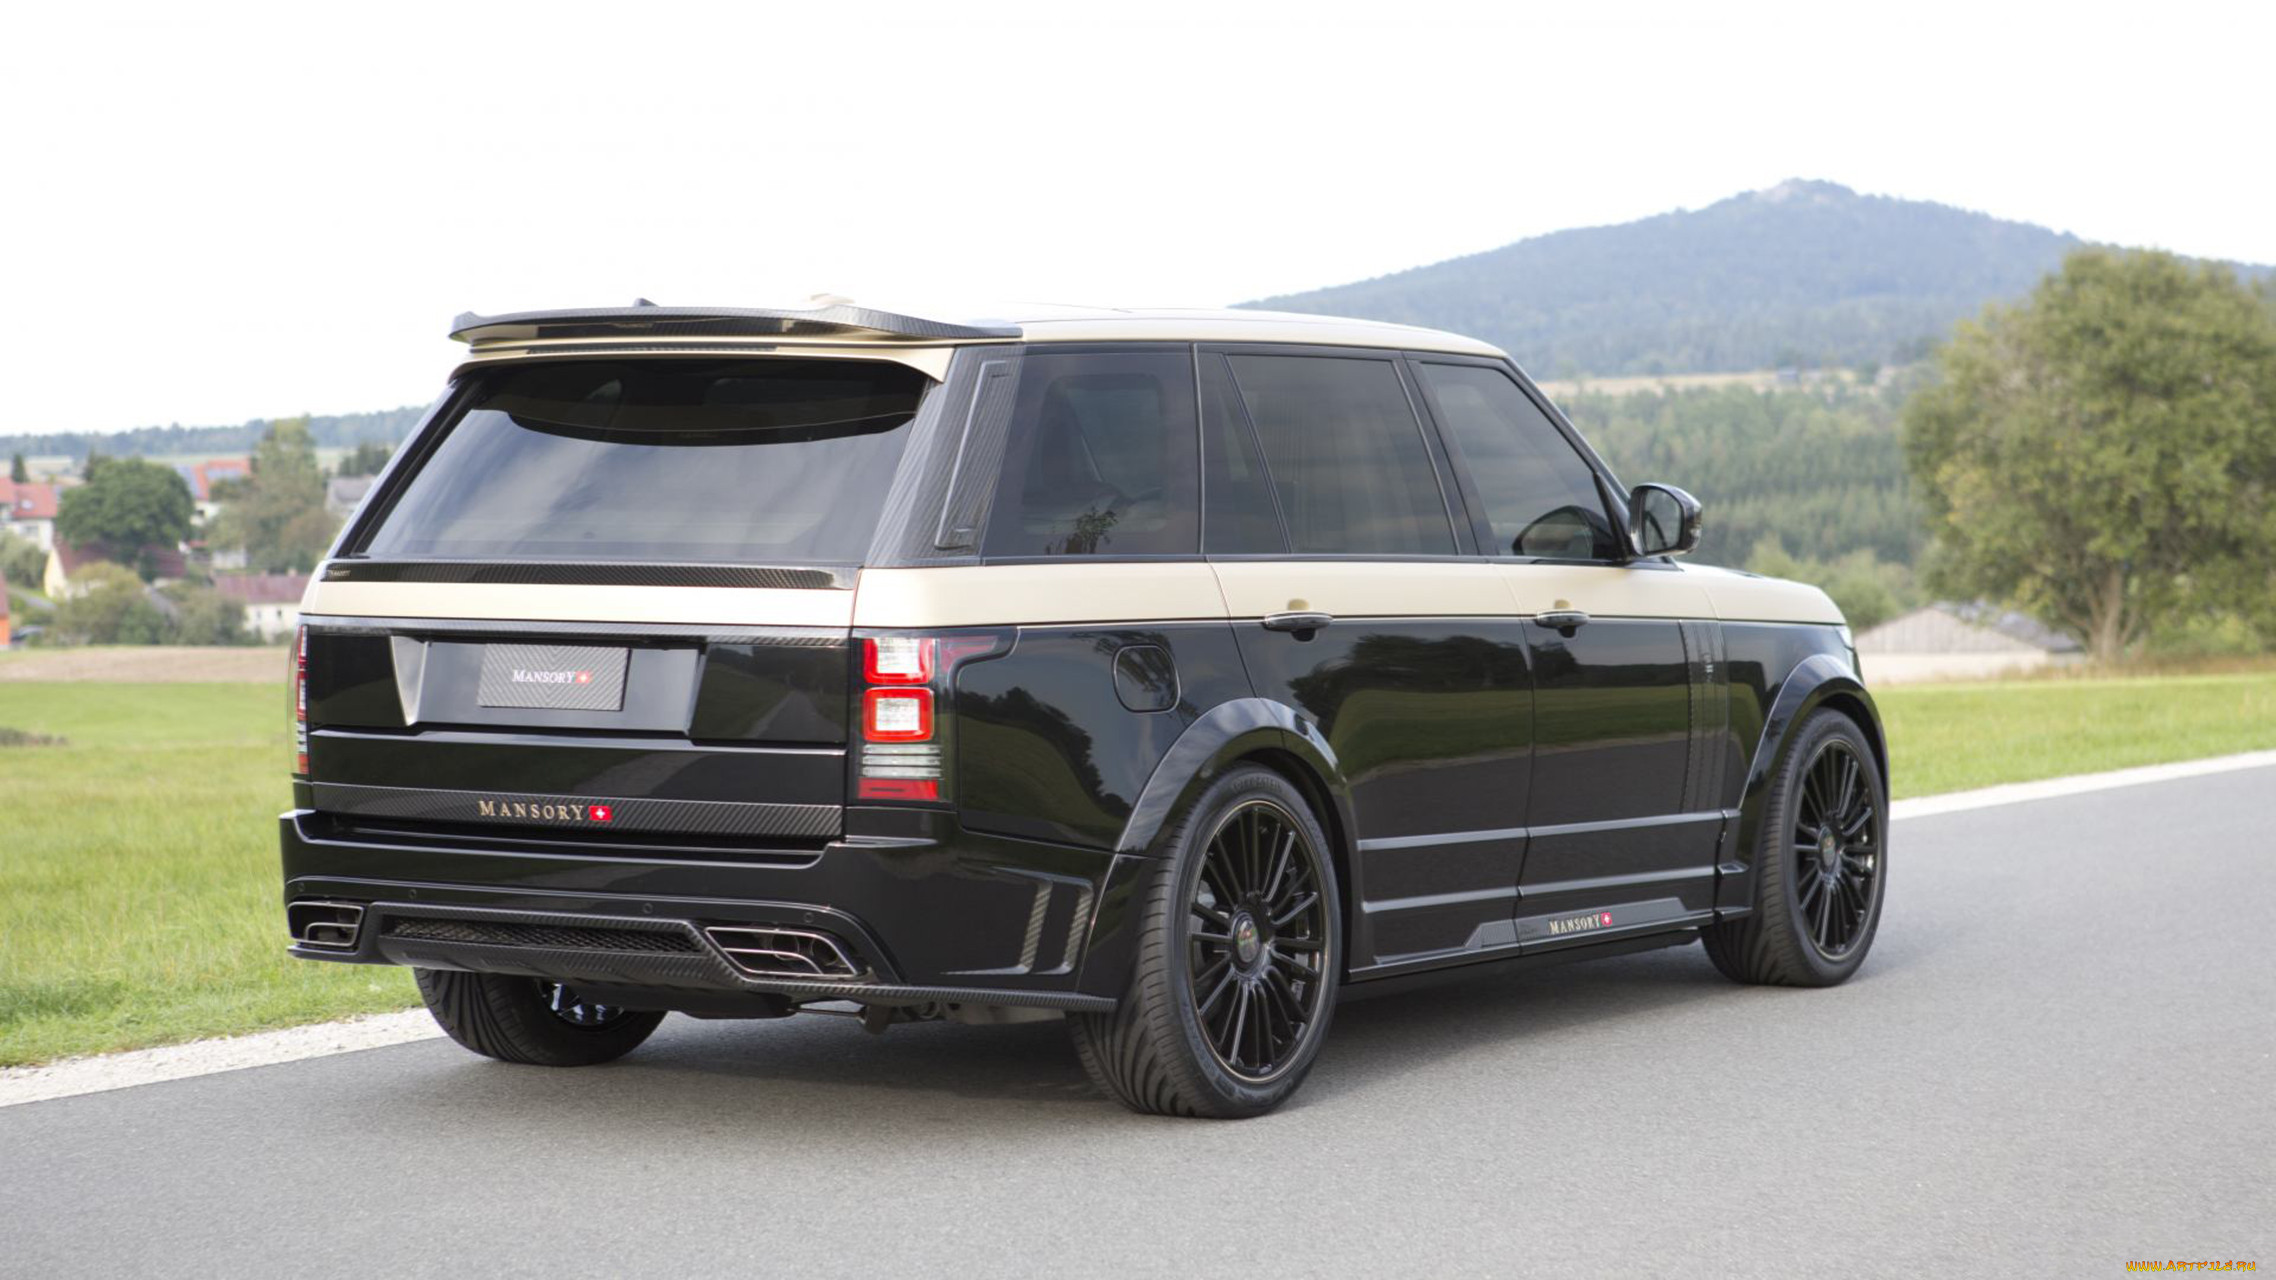 mansory range rover autobiography extended 2016, , range rover, 2016, extended, autobiography, range, rover, mansory